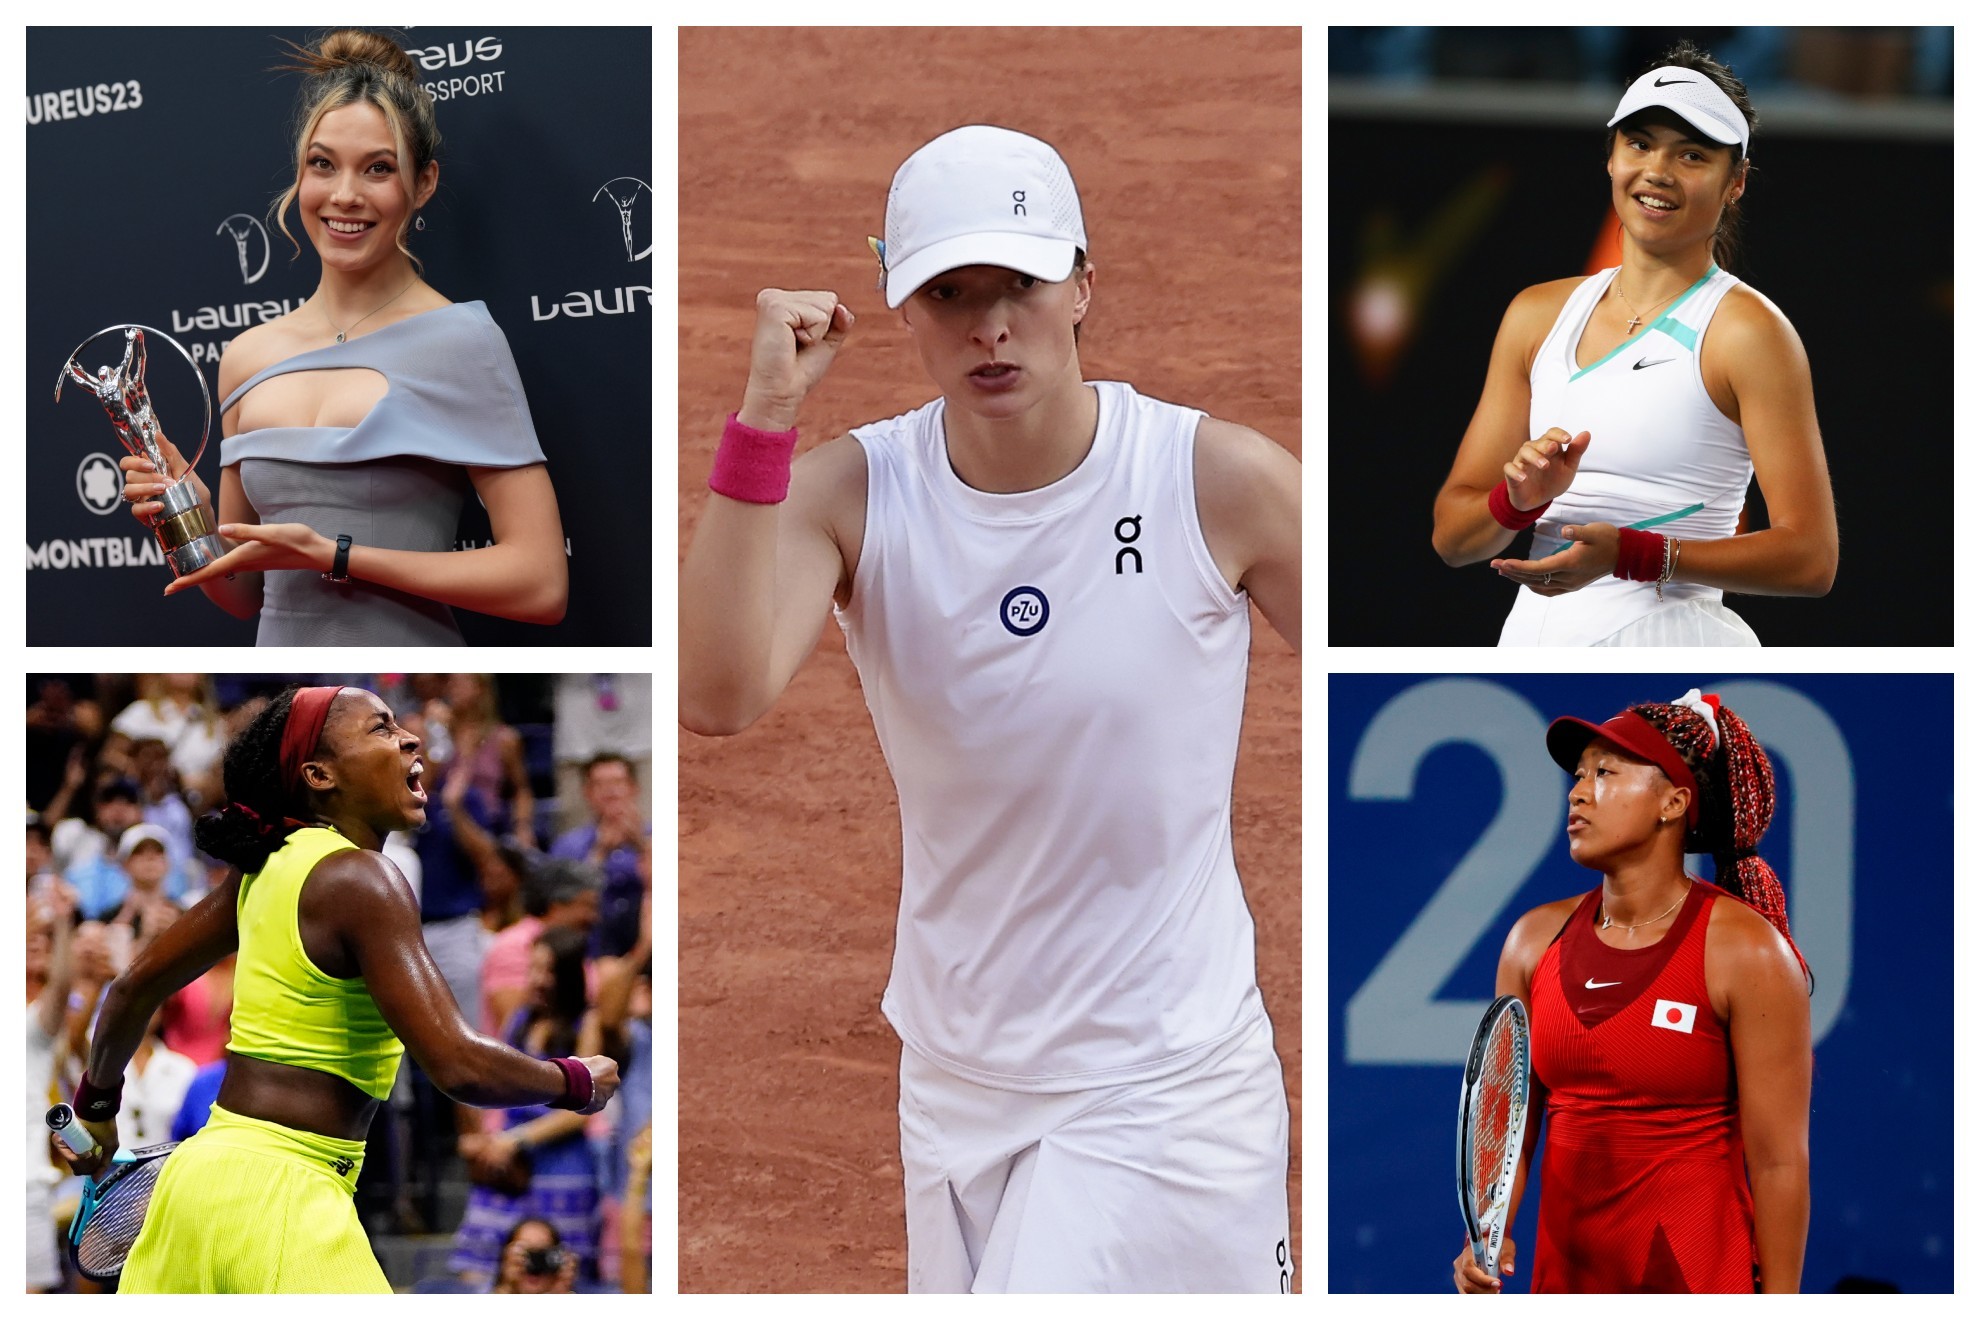 Top 20 highest paid female athletes in 2023: How many Americans are there?